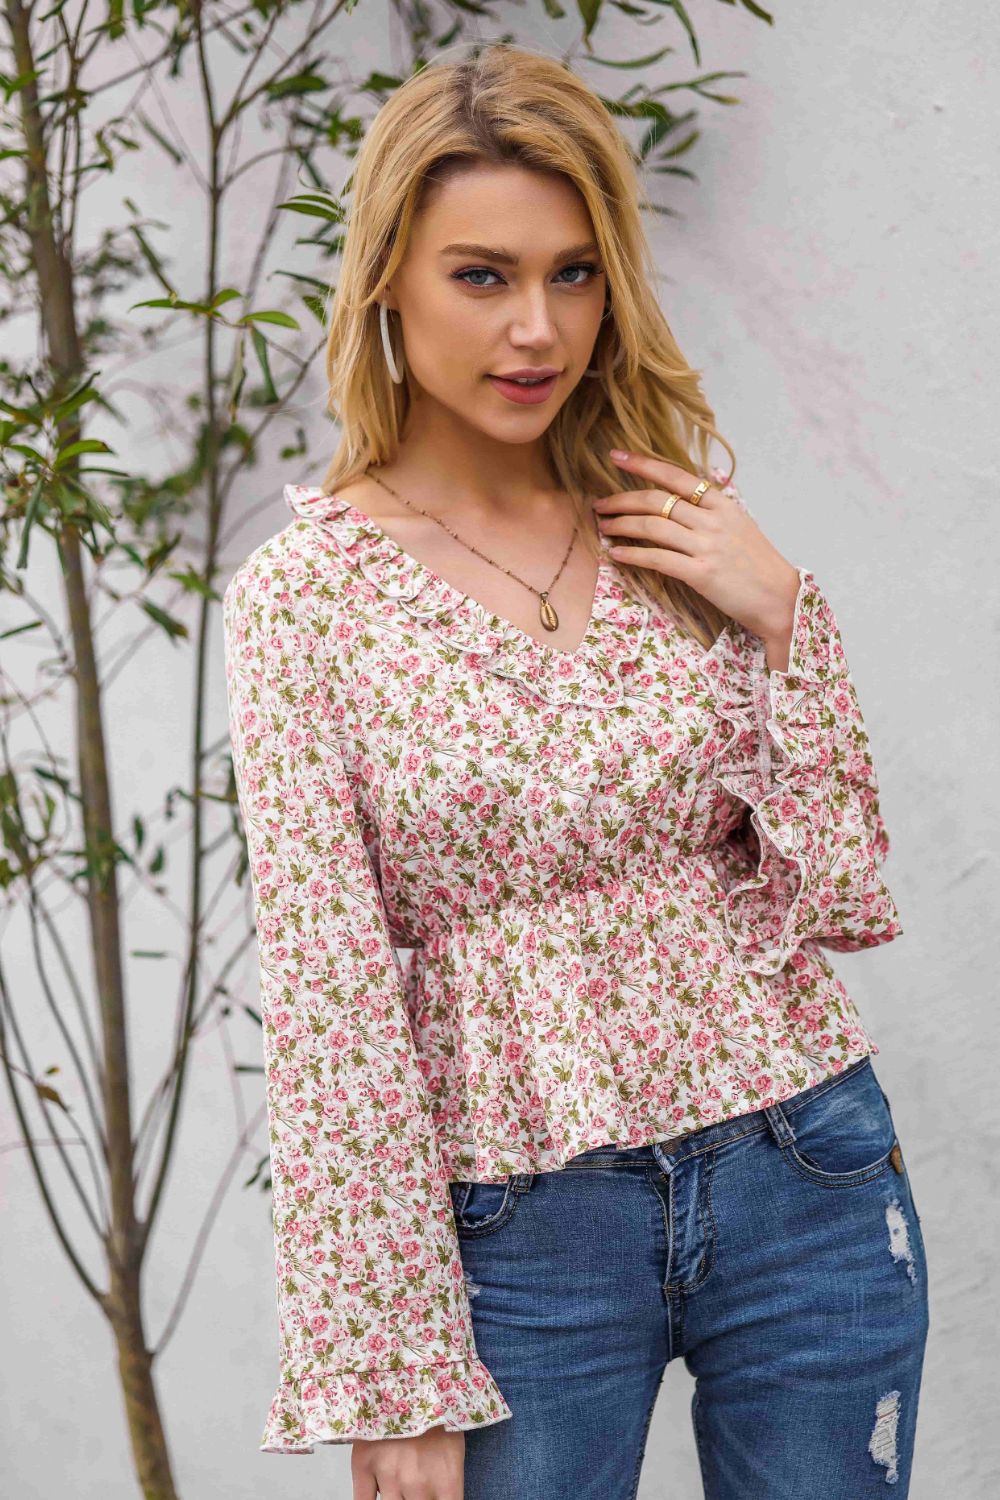 Floral Peplum Blouse with Ruffled V-Neck Floral